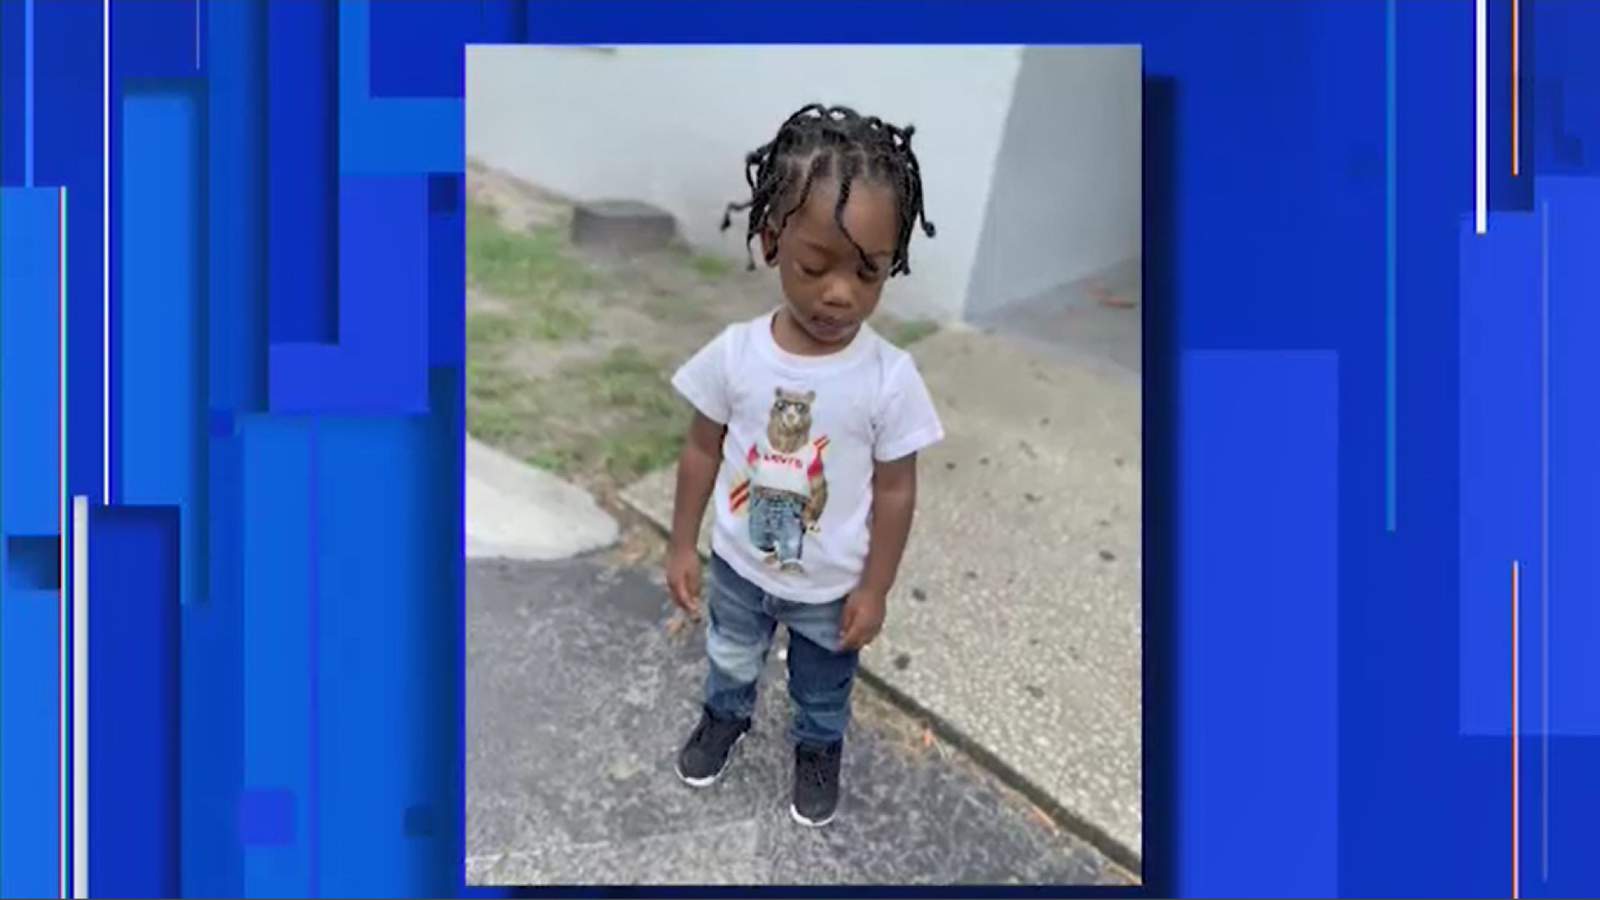 Vigil for 3-year-old killed in drive-by shooting canceled out of safety concerns